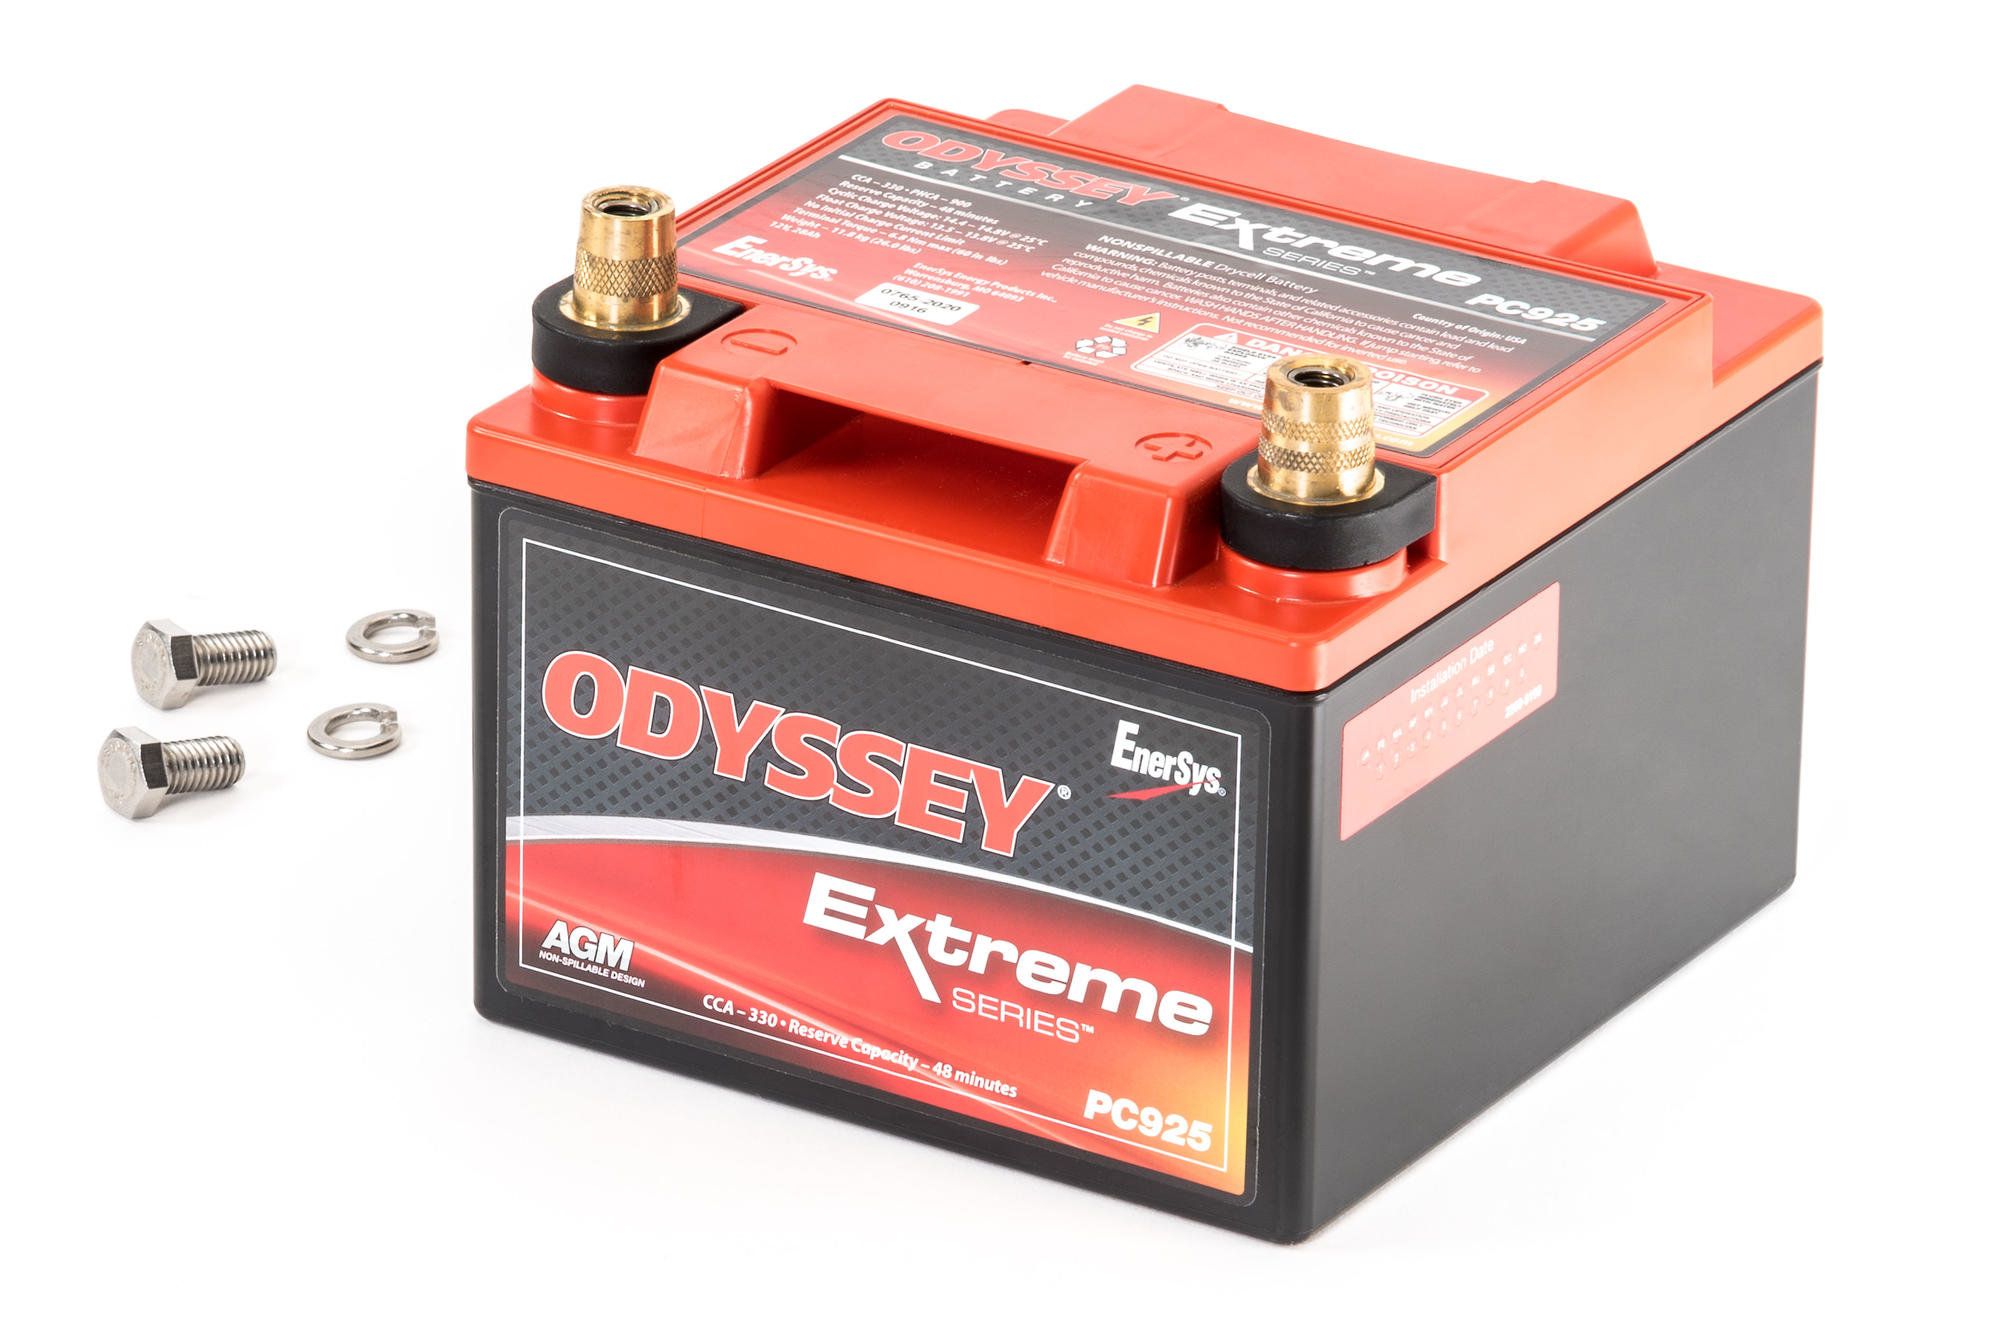 Battery products. Odyssey pc925-m Marine Battery. Car Battery.